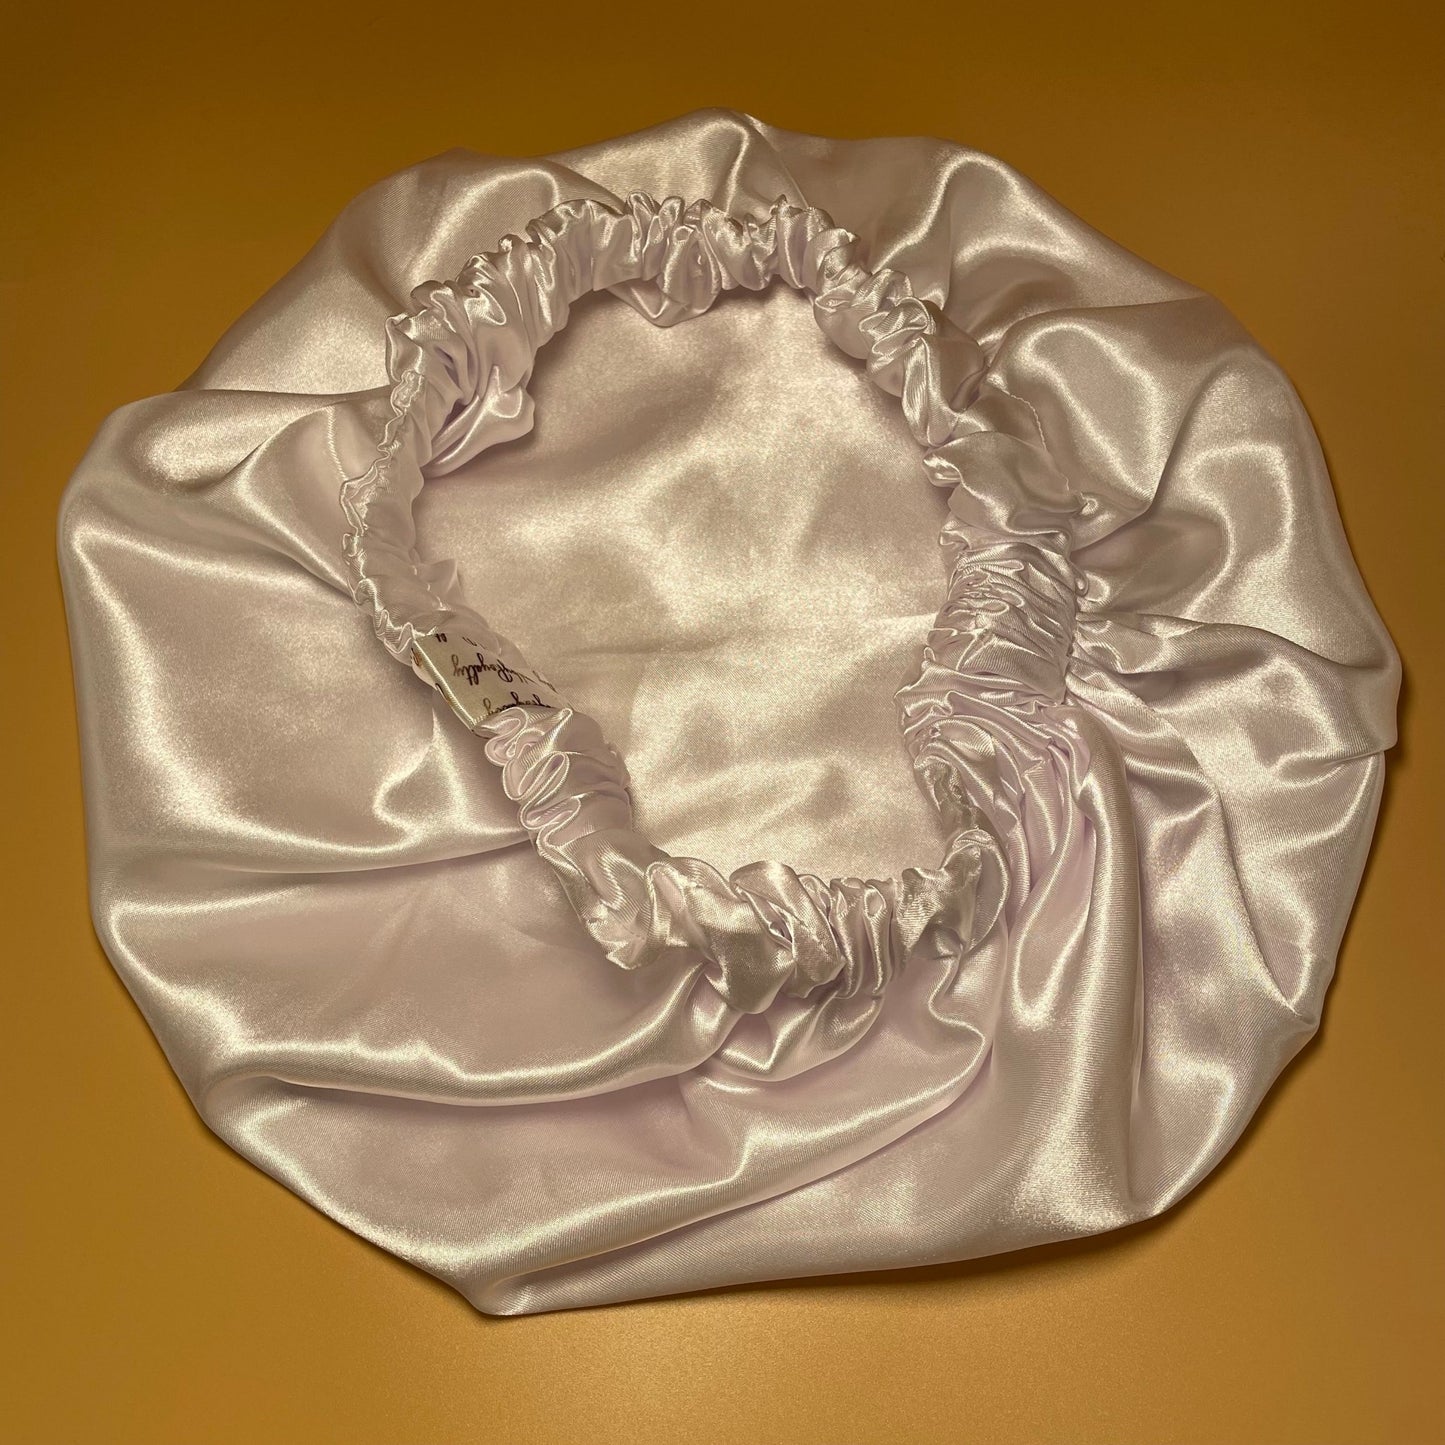 All-White Wedding Night Bonnet - Crowned by Royalty5